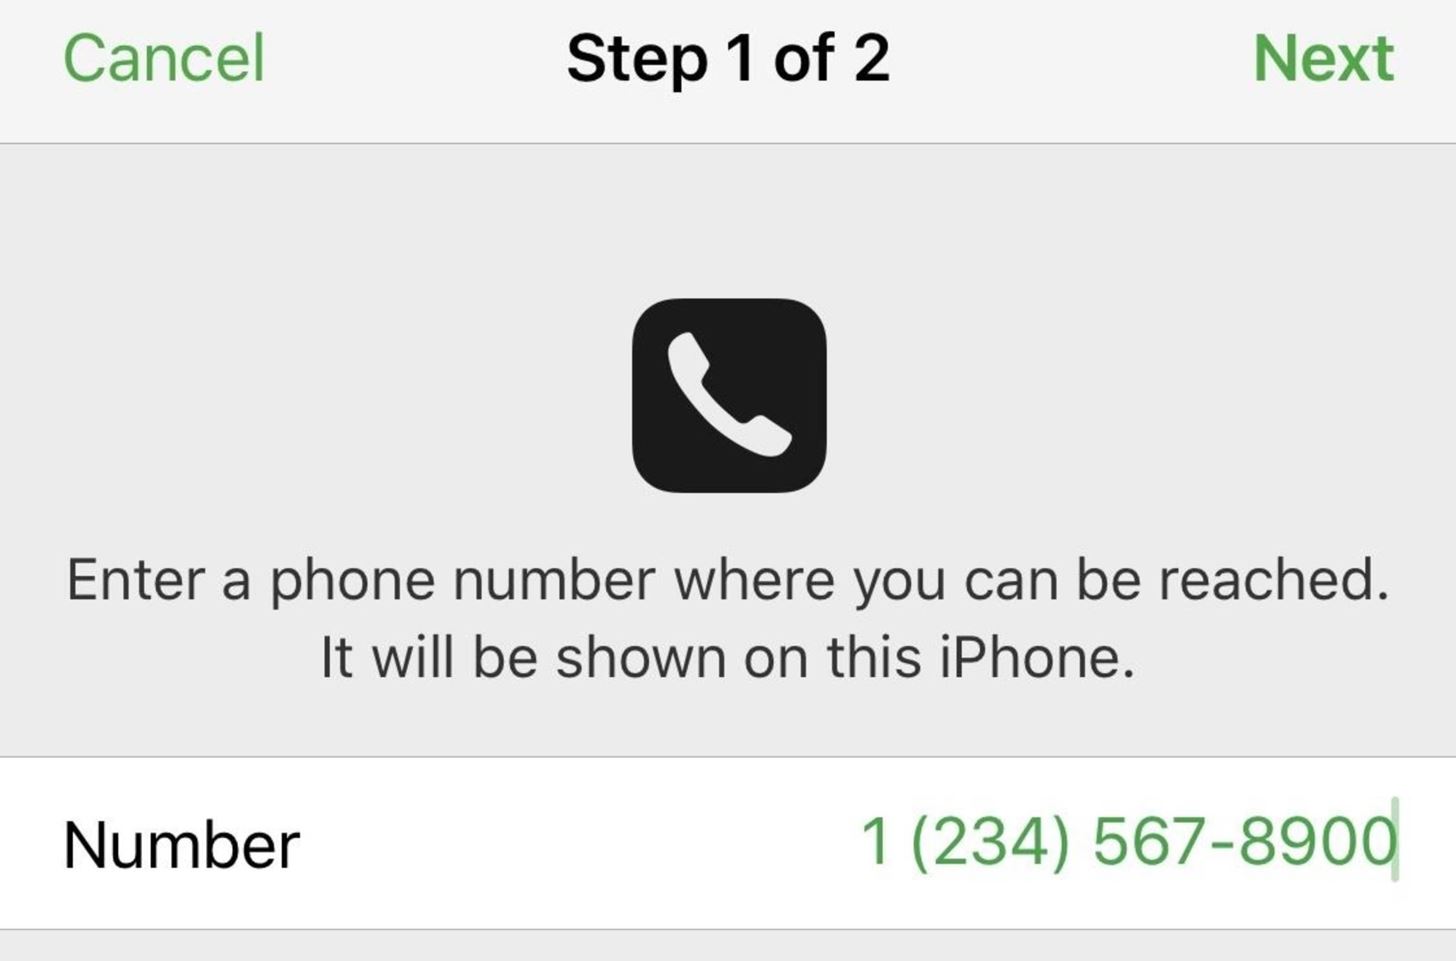 Get Your Missing iPhone Back by Remotely Setting a Message & Contact Info on Its Lock Screen